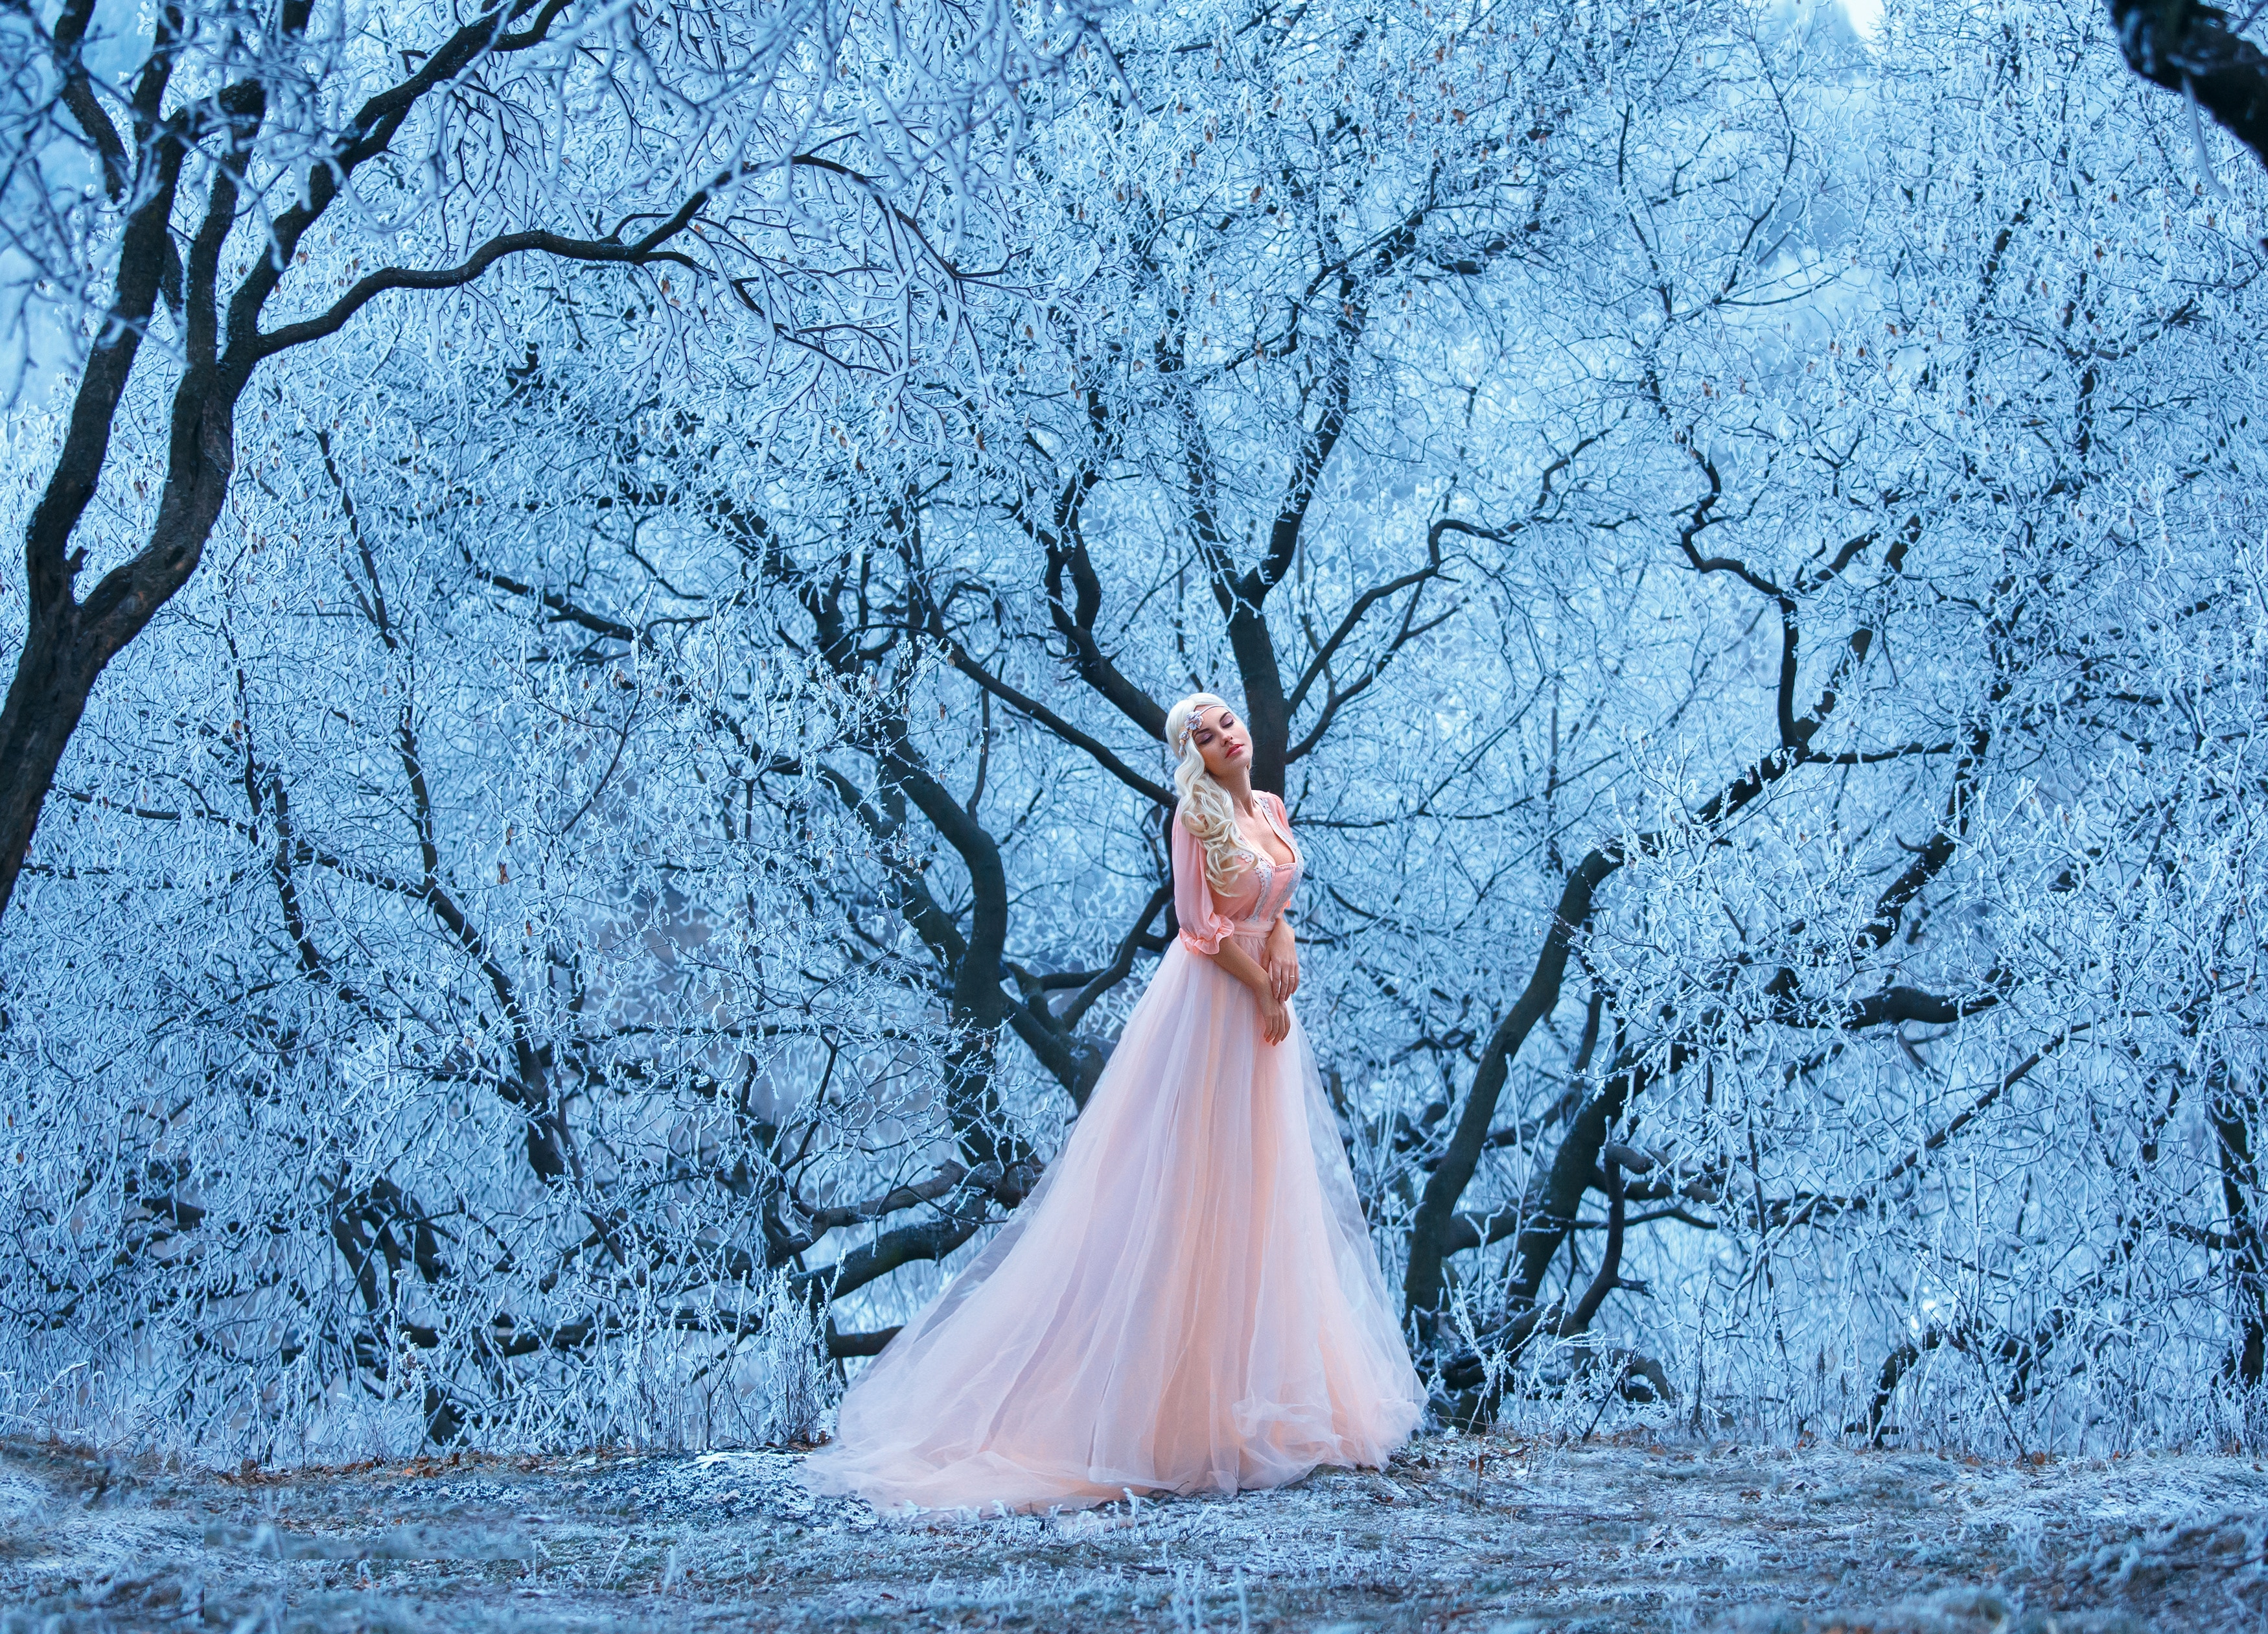 Beautiful young girl stands one among snowy trees.